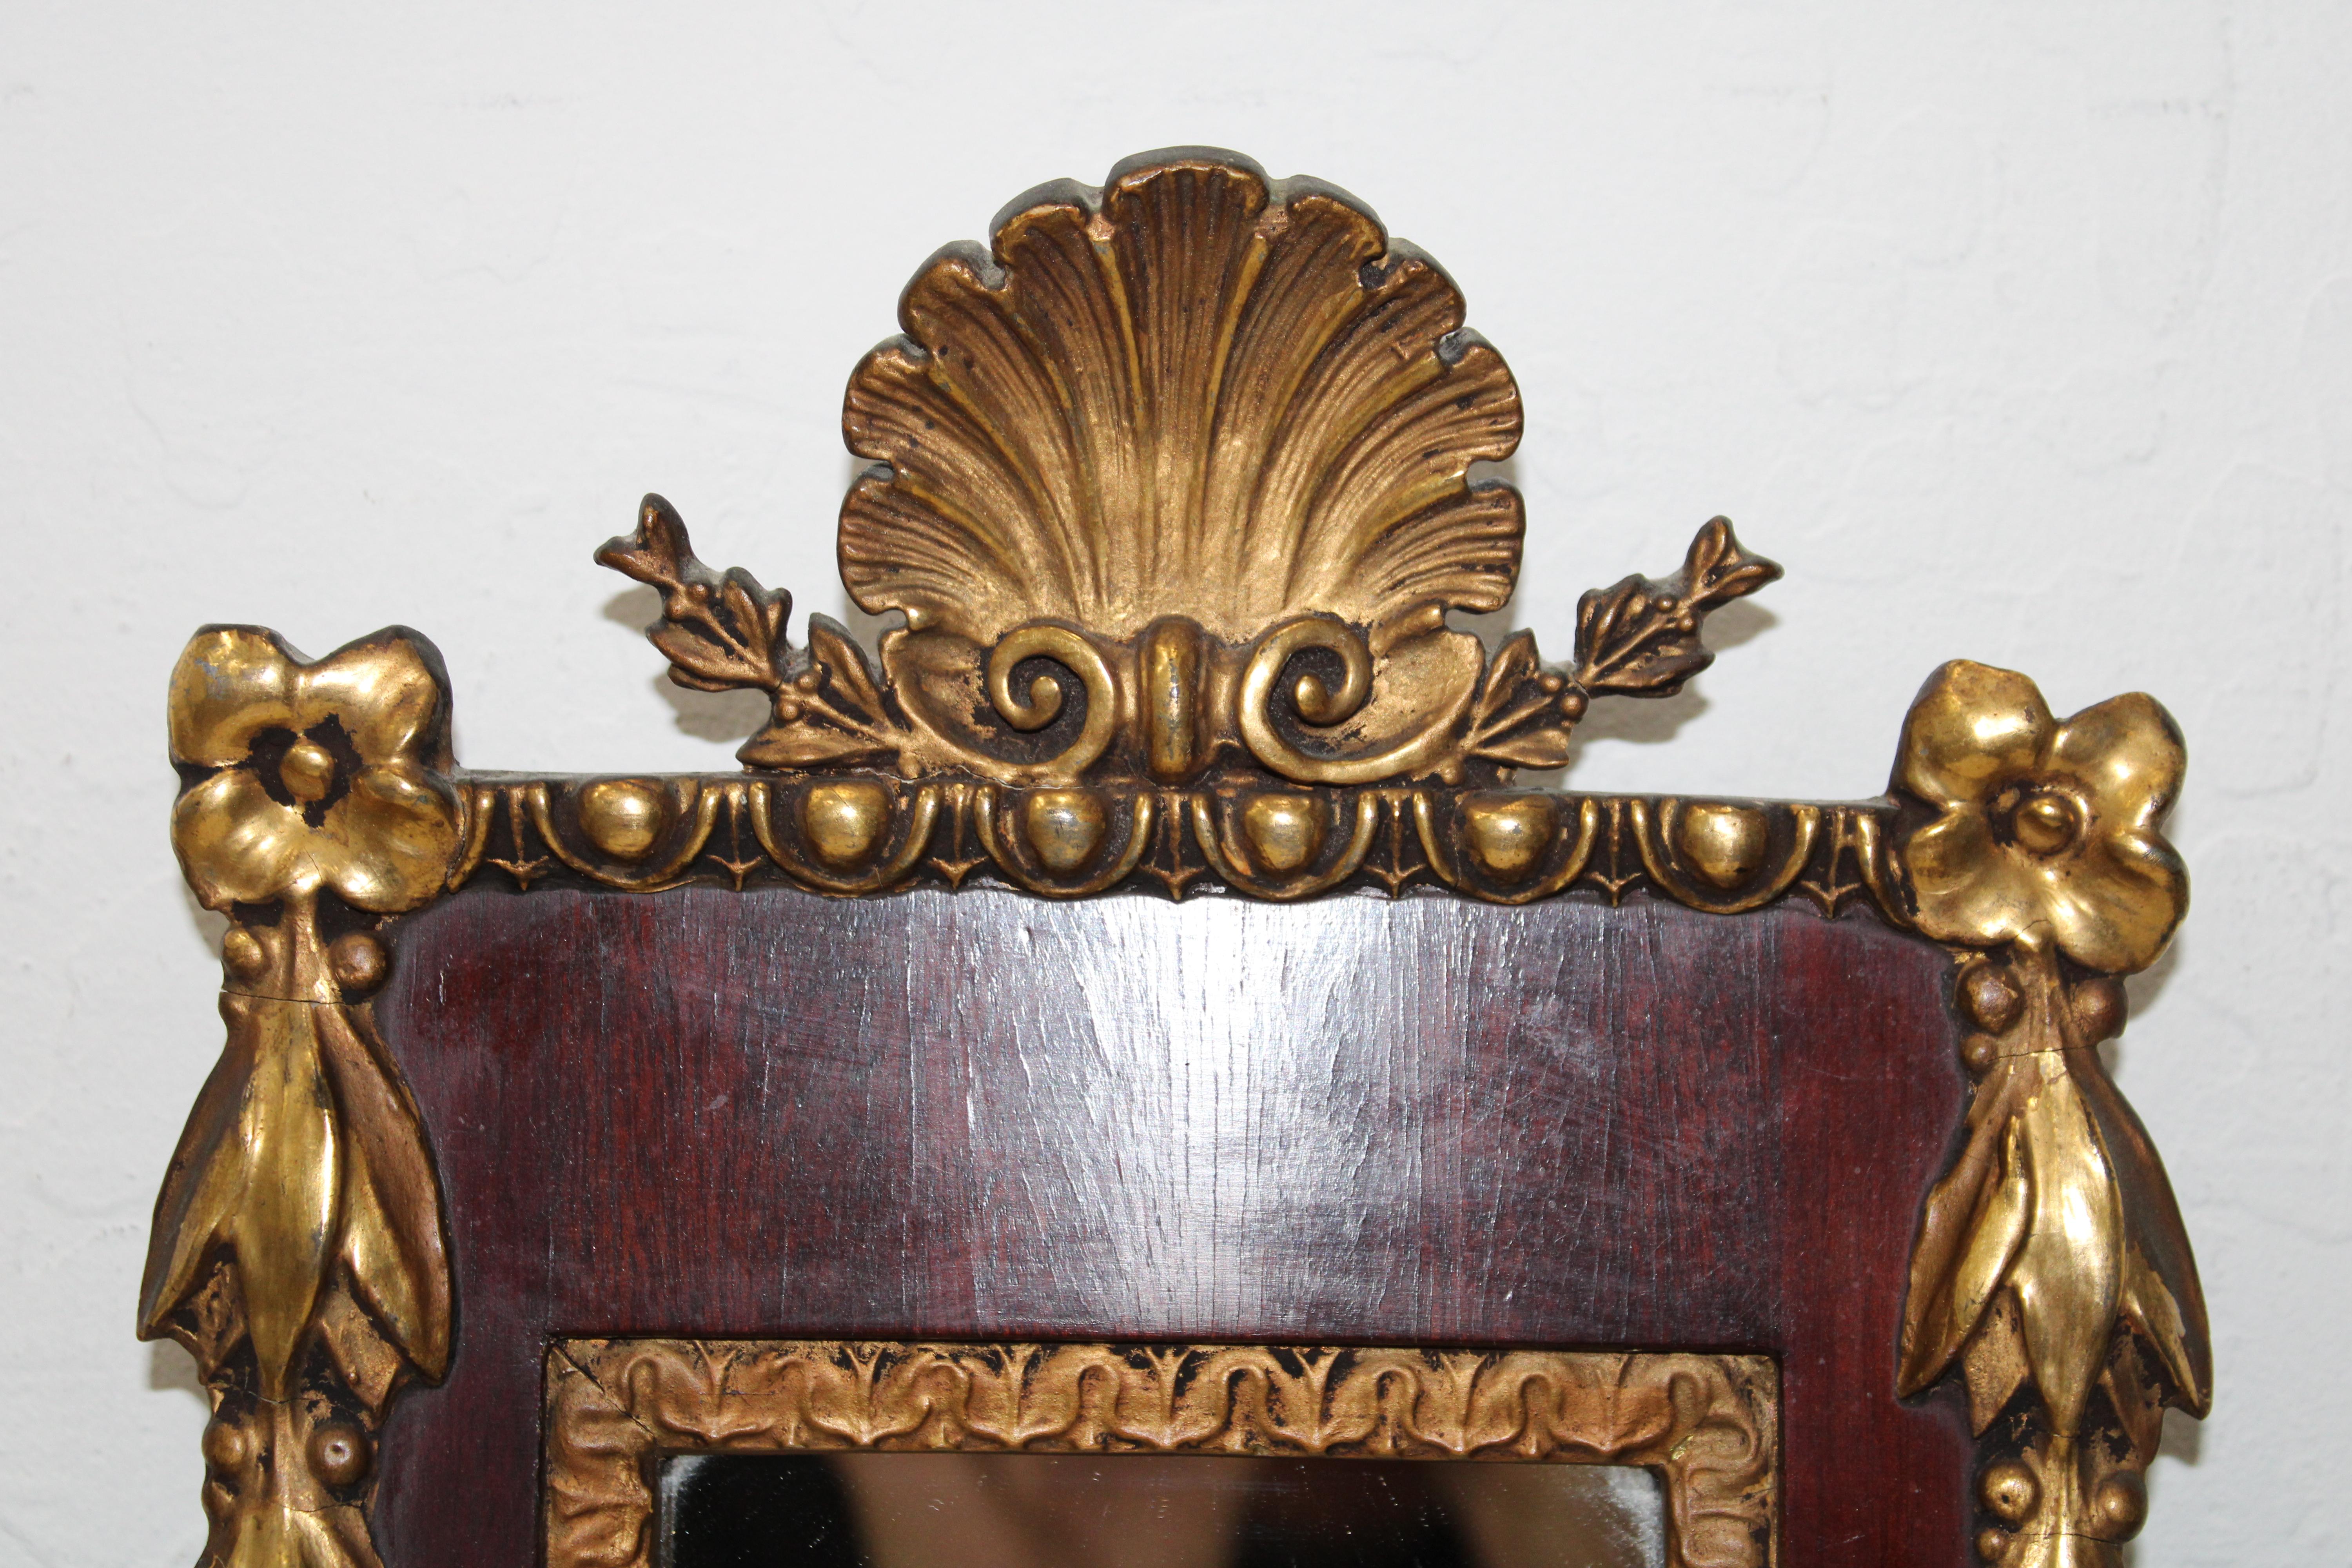 C. 19th Century

Rare sized carved & gilt, empire mirror w/ shell finial & floral decoration.